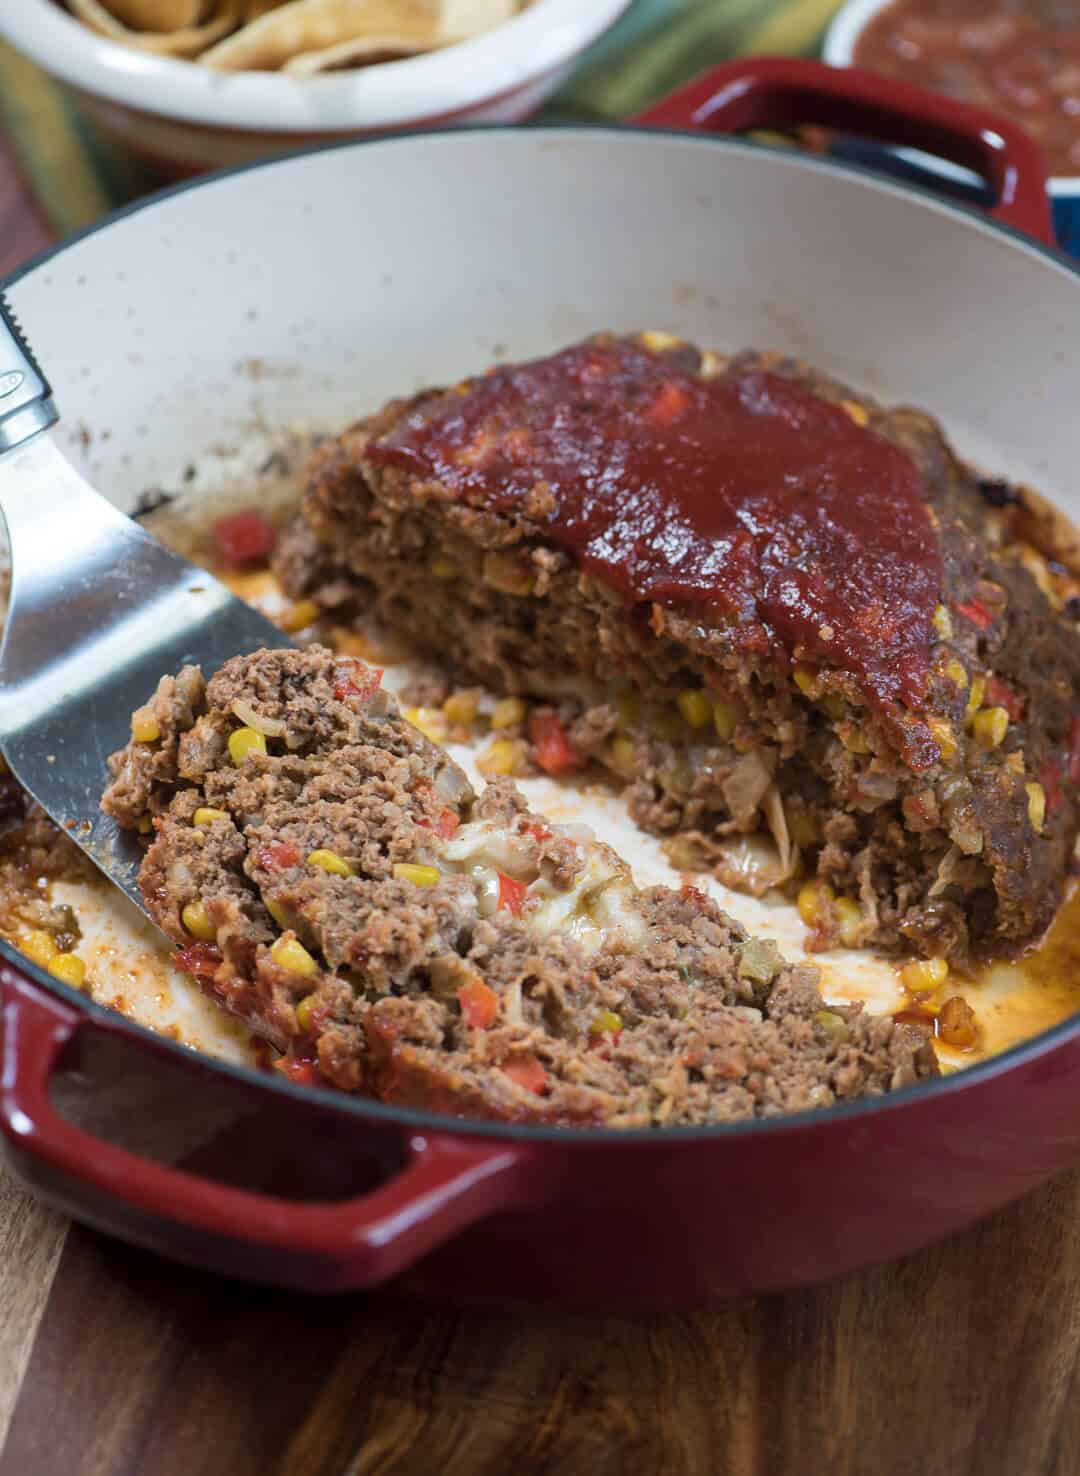 A spatula lifts a slice of meatloaf.